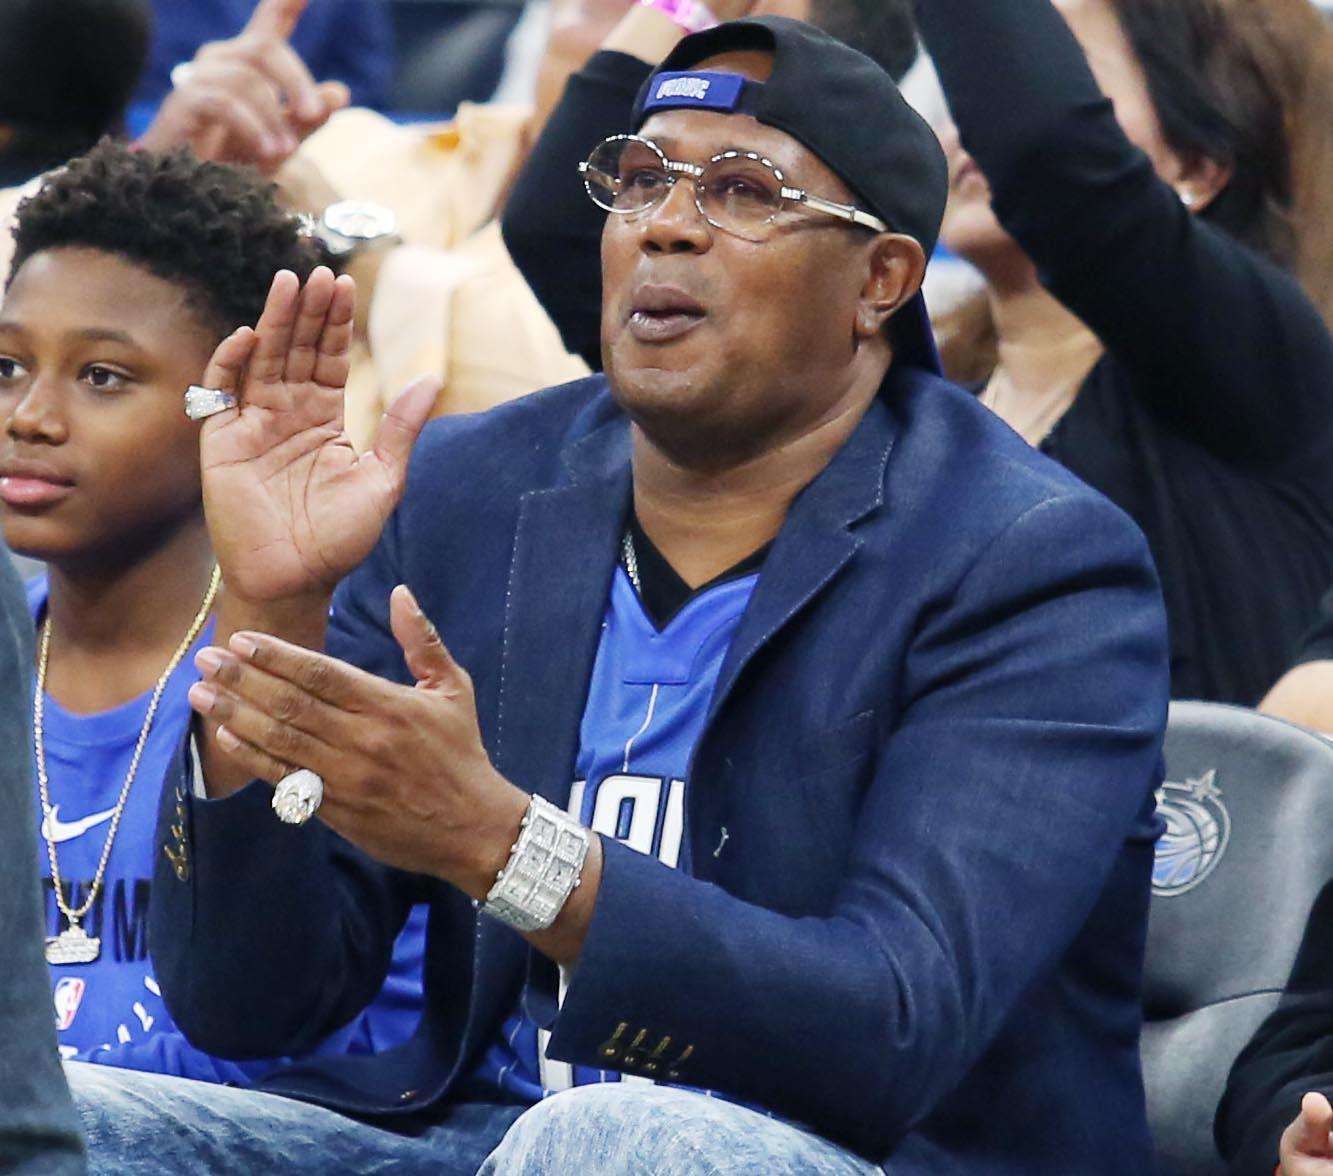 Master P cheers from courtside seats as the Chicago Bulls visit the Orlando Magic in 2017